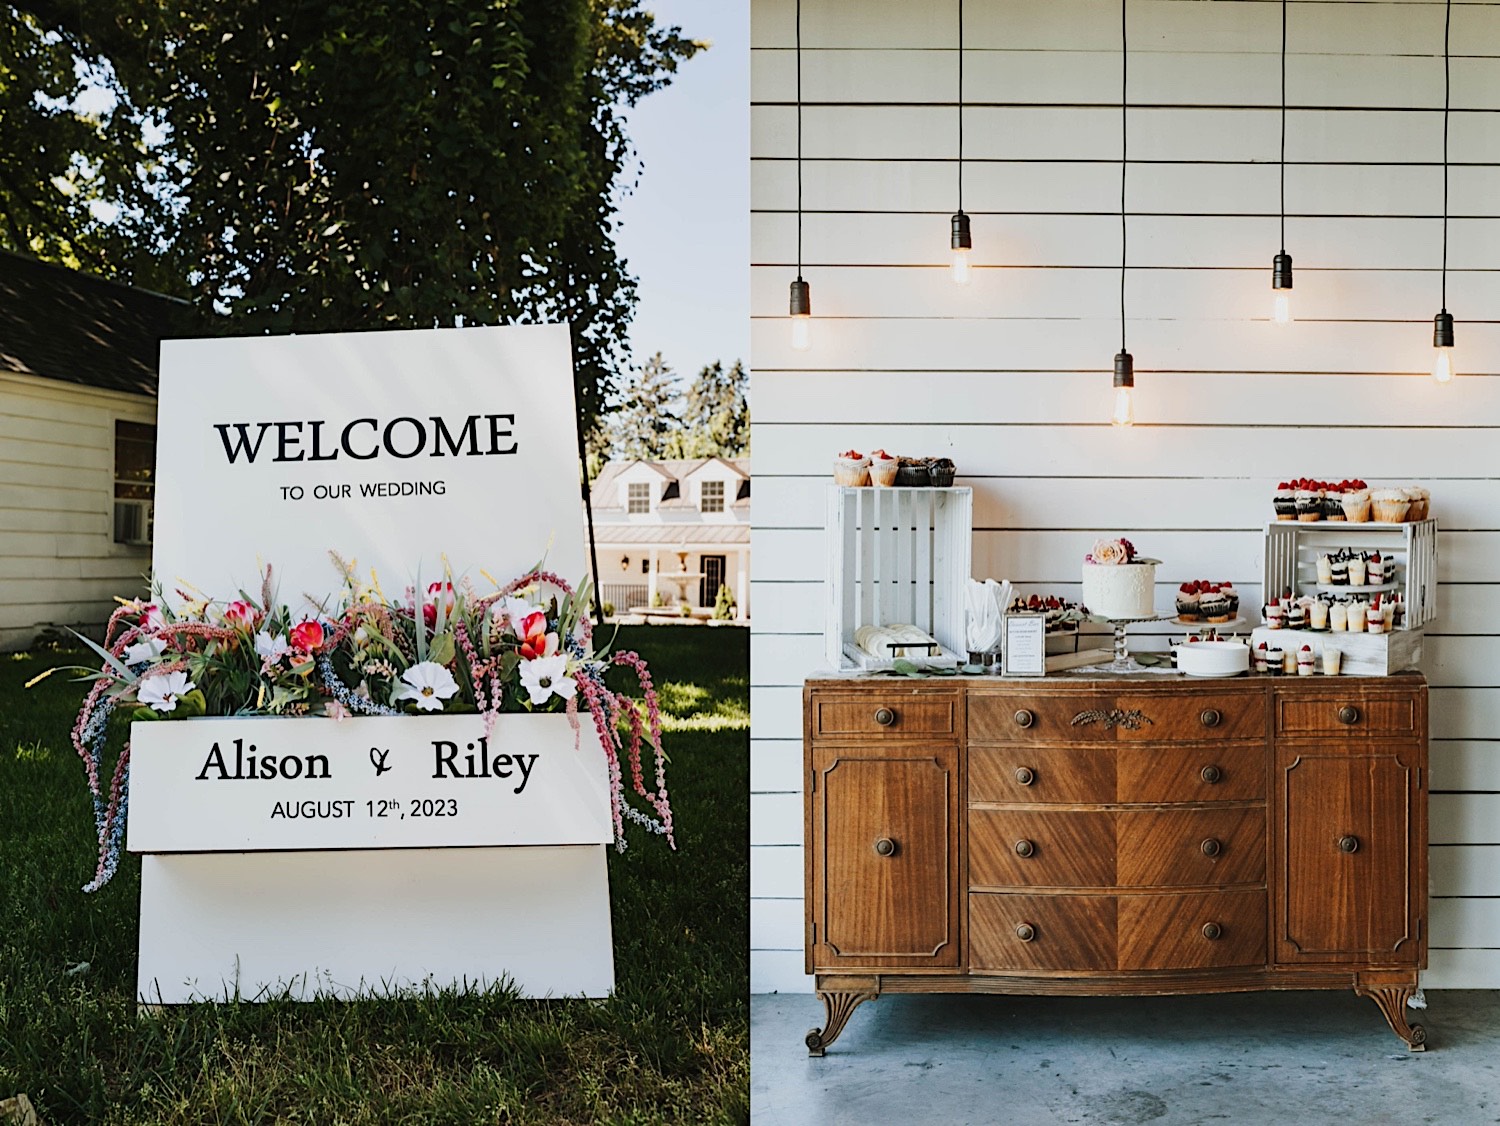 2 photos side by side, the left is of a welcome sign for a wedding, the right is of a dessert table with hanging lights above it